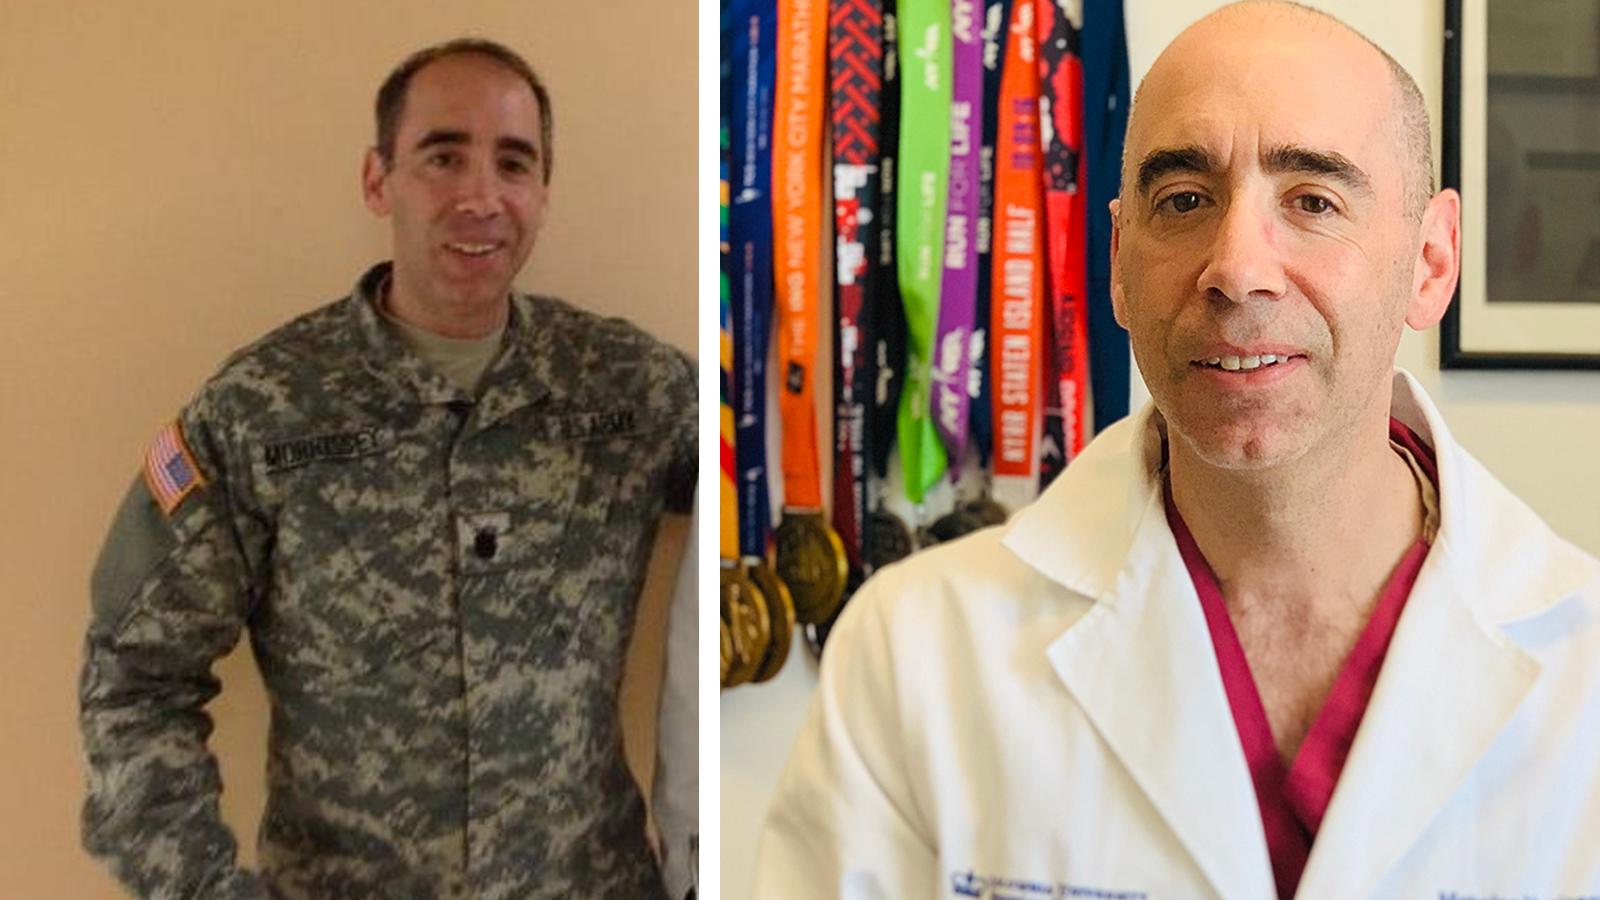 Dr. Nicholas Morrissey standing in his US Army uniform (left photo) and in his doctor's white coat in his Columbia office (right photo)